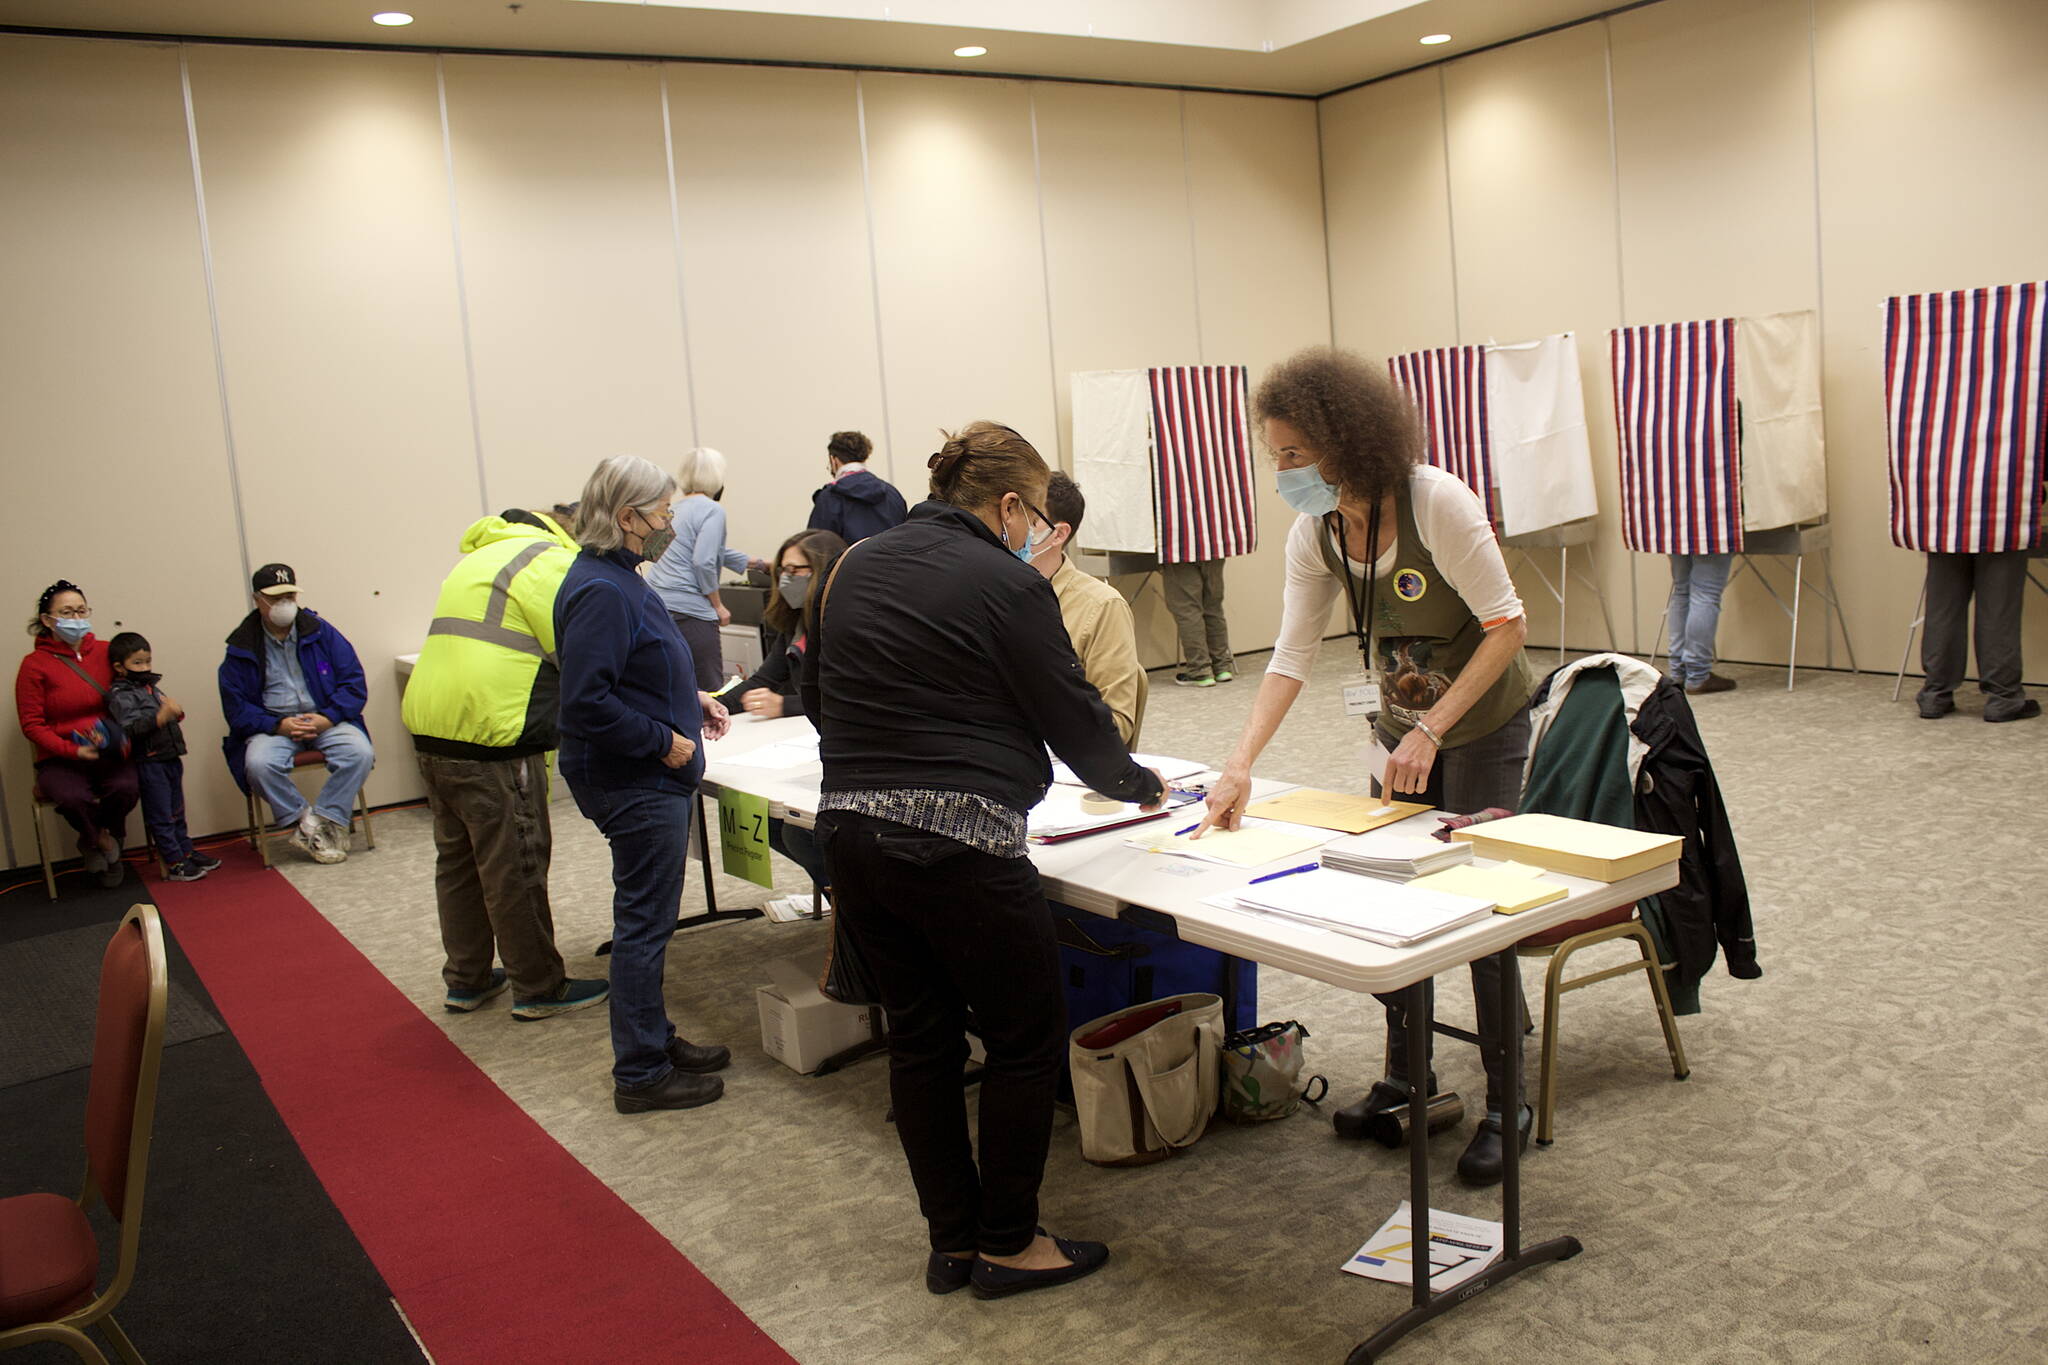 Emily Kane, precinct chair at the Elizabeth Peratrovich Hall polling station, instructs a voter on filling out the ballot for Tuesday’s combined special and primary election. Kane, a local election worker since 2016, said there is a high rate of spoiled ballots this year due to confusion about the new ranked choice voting system. (Mark Sabbatini / Juneau Empire)